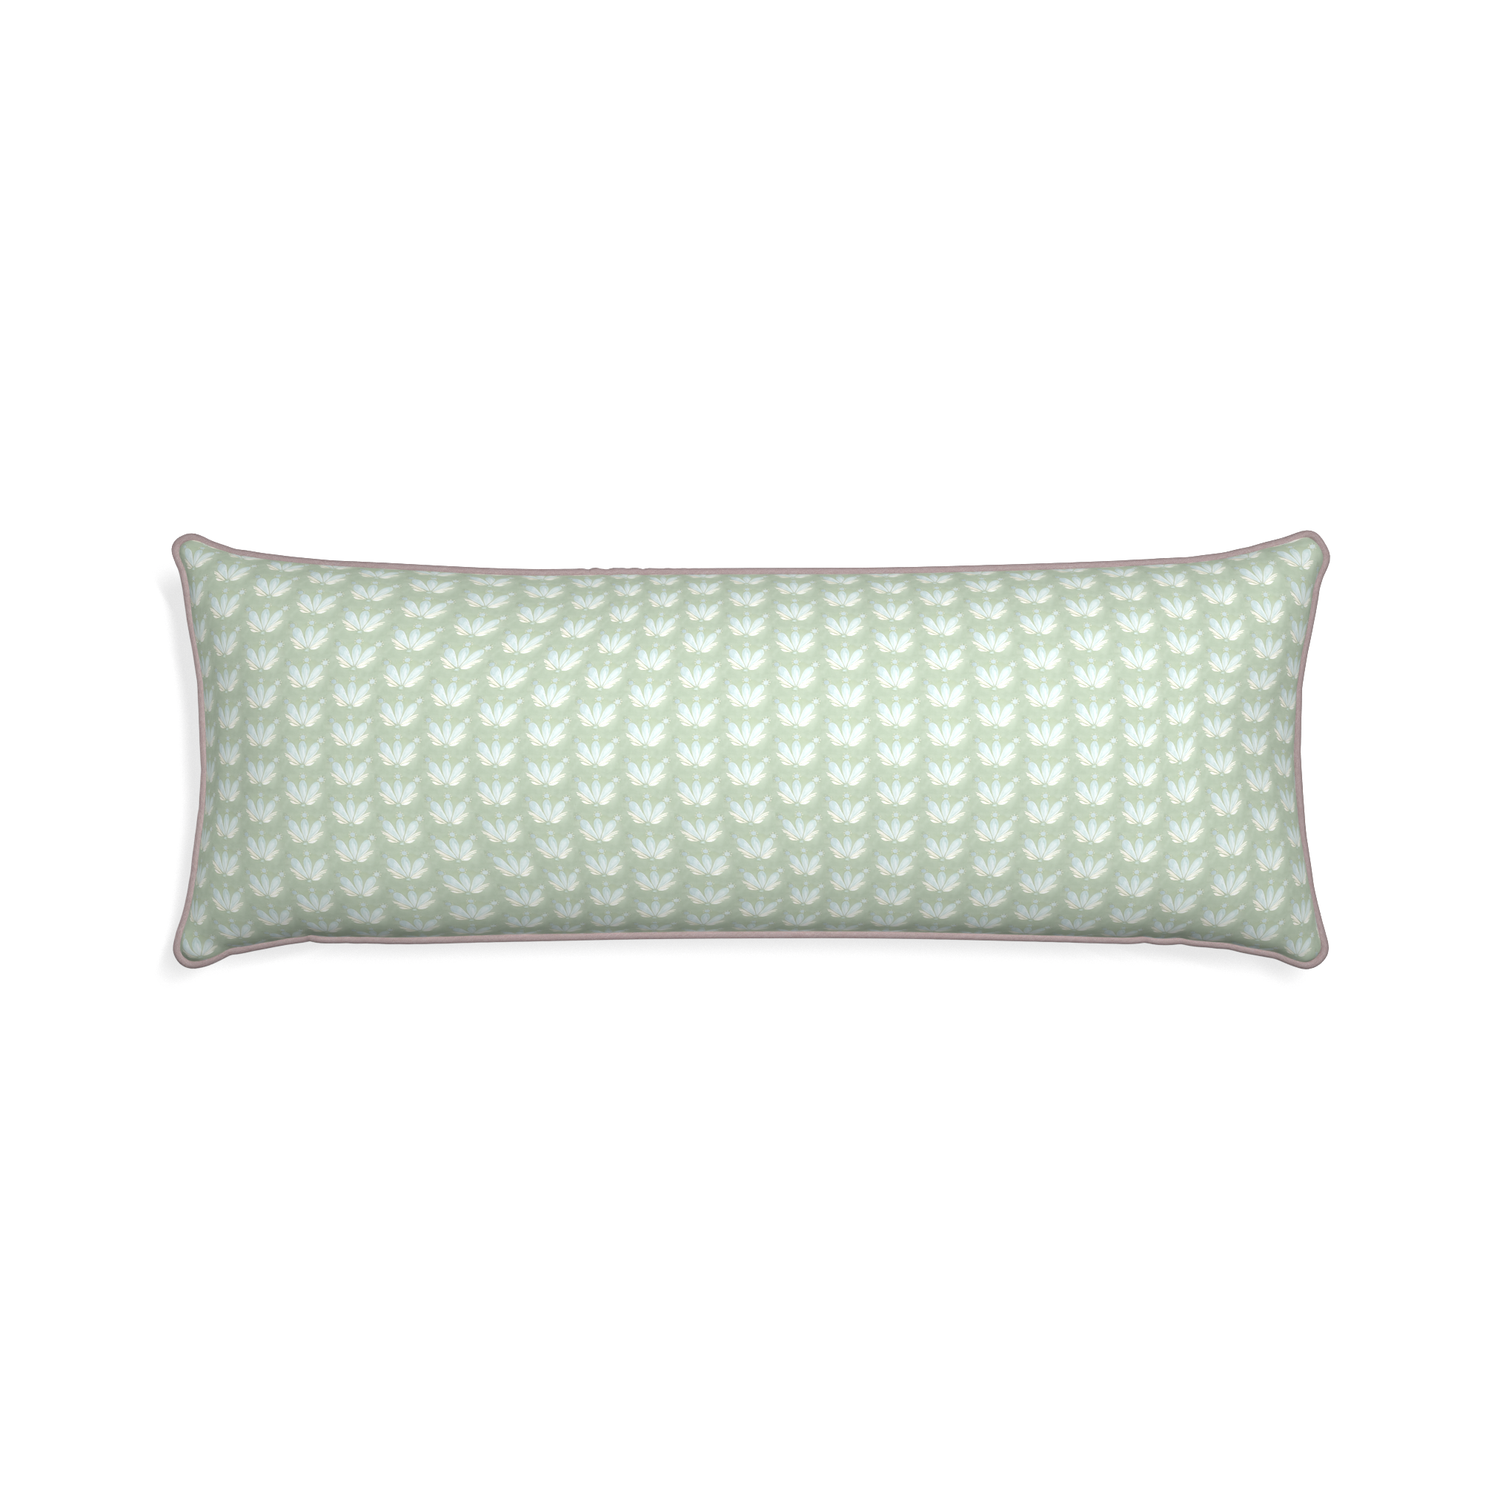 Xl-lumbar serena sea salt custom blue & green floral drop repeatpillow with orchid piping on white background